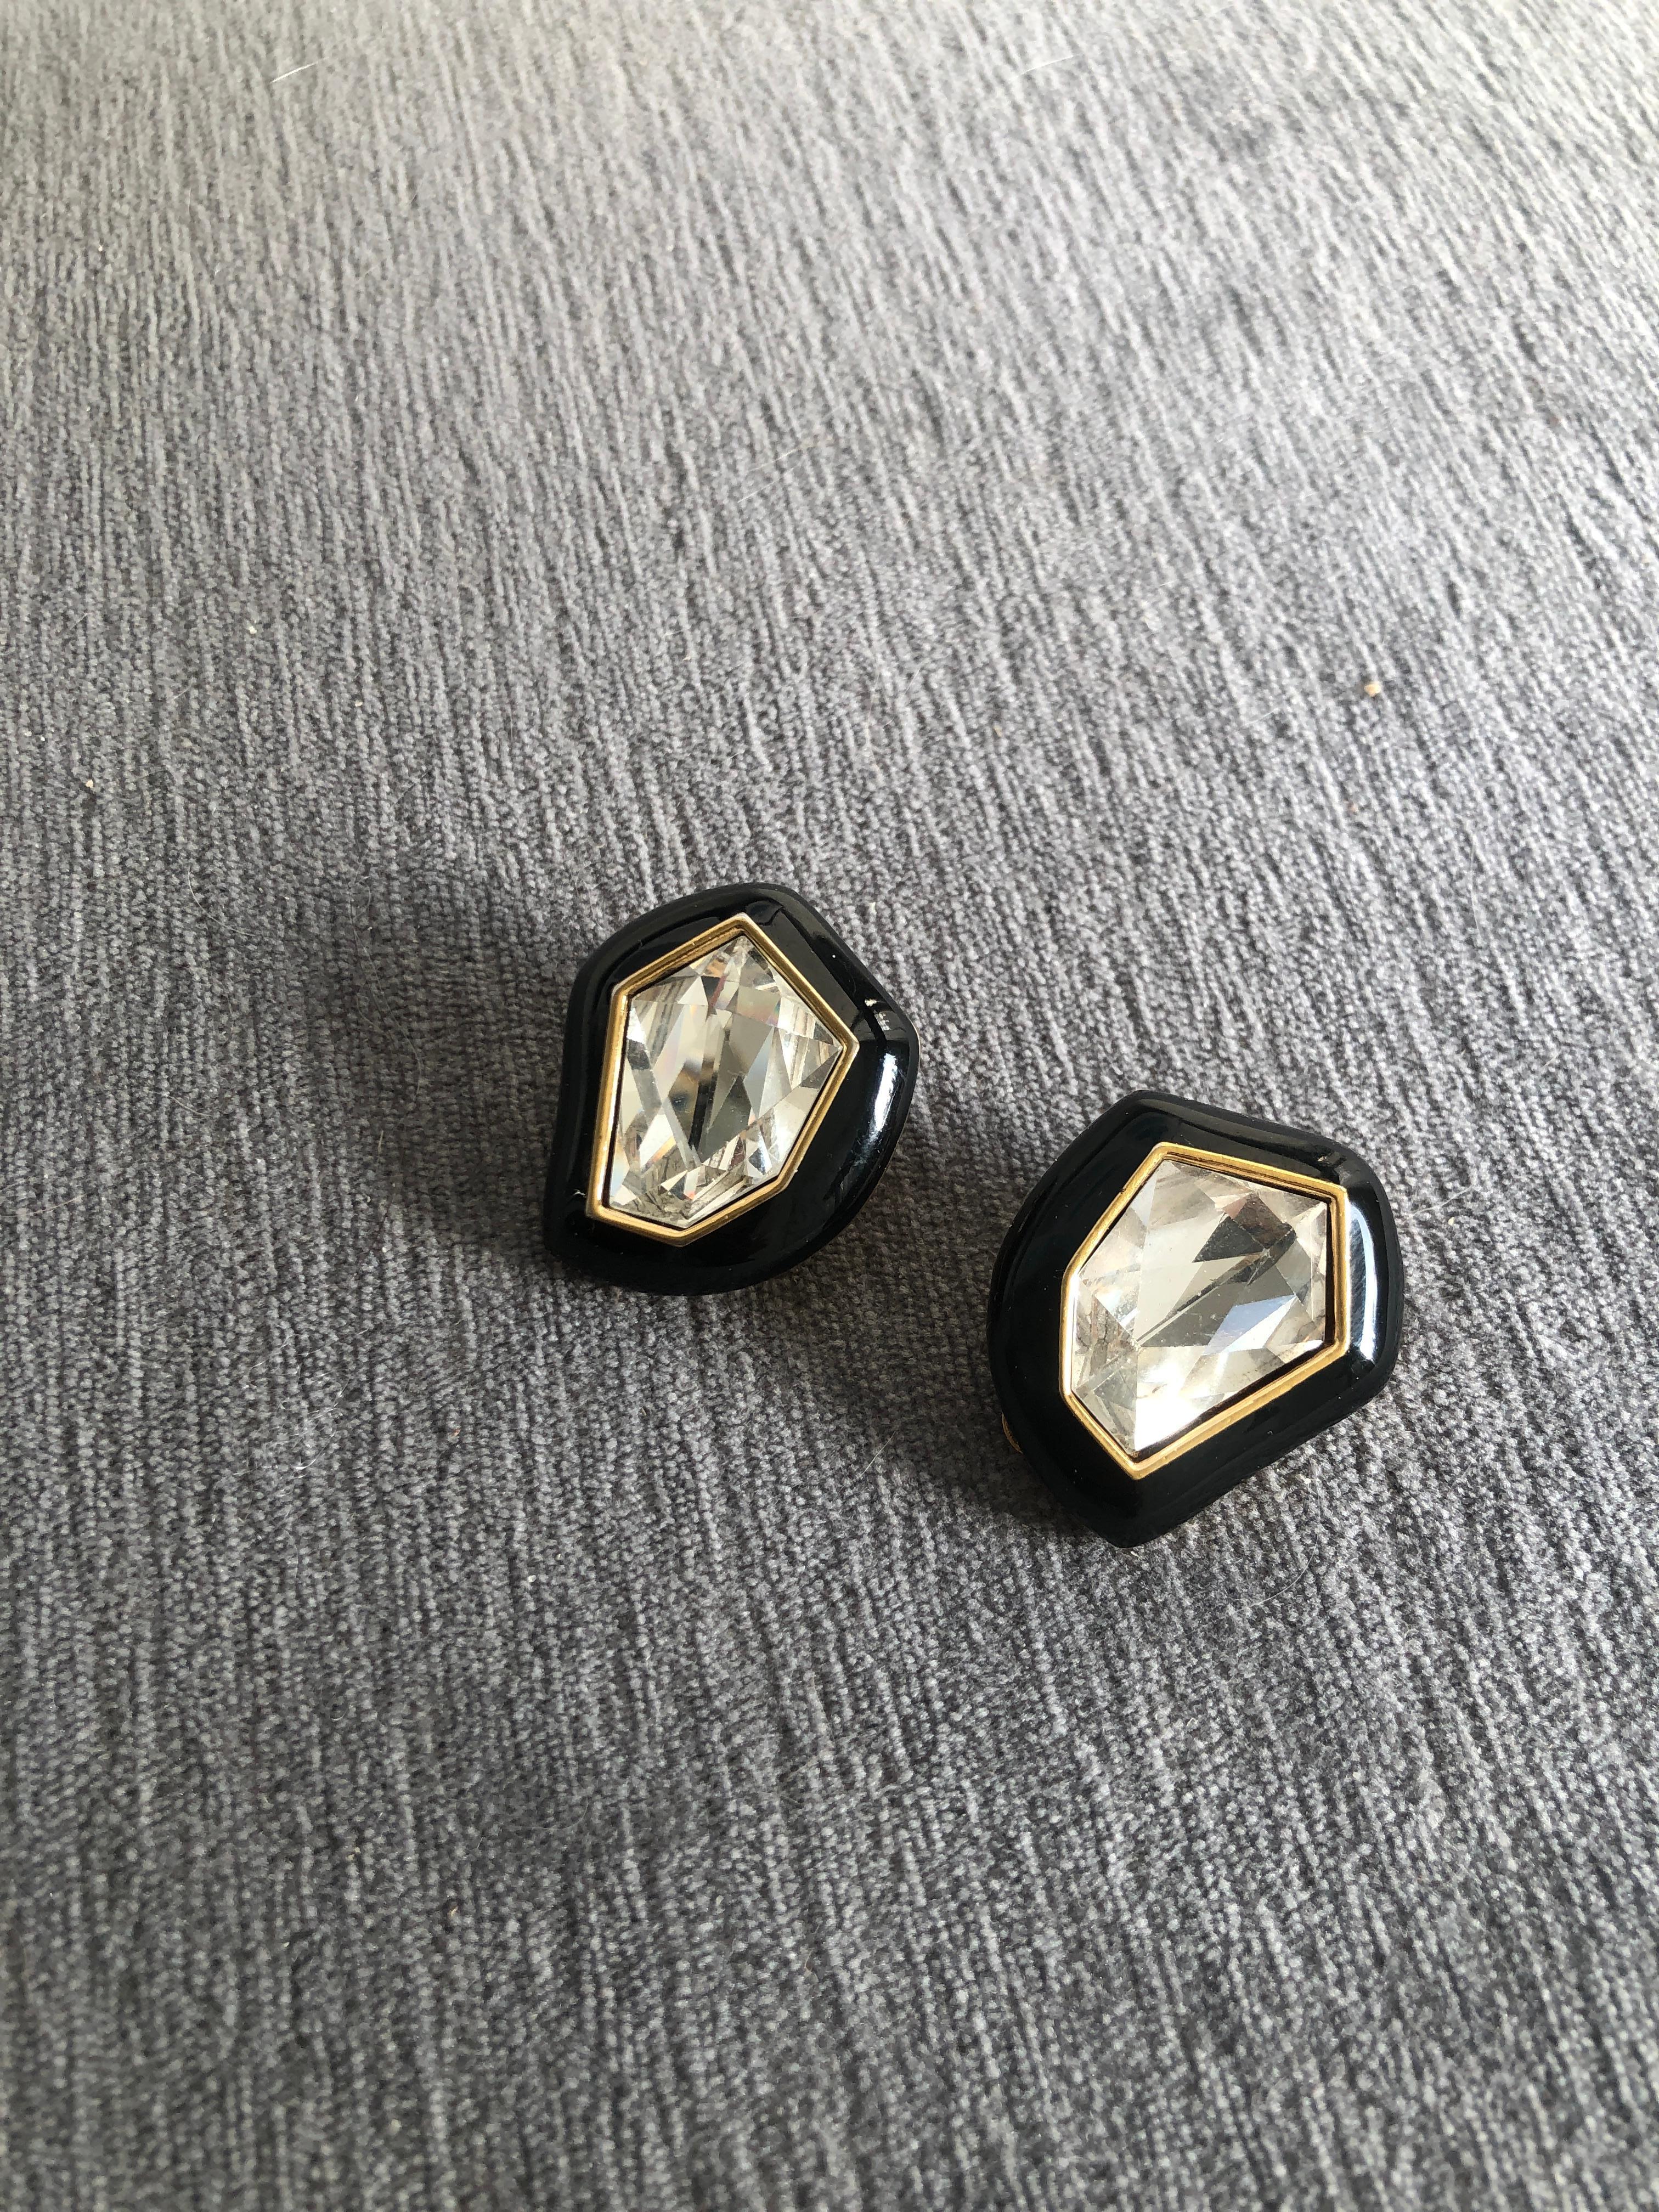 So chic. Designed by Daniel Swarovski in the late 80's. From a very very chic and wealthy Palm Springs Fashionista's estate. Large faceted christals framed in black enamel with gold plate trim. They don't make them like this anymore. They look